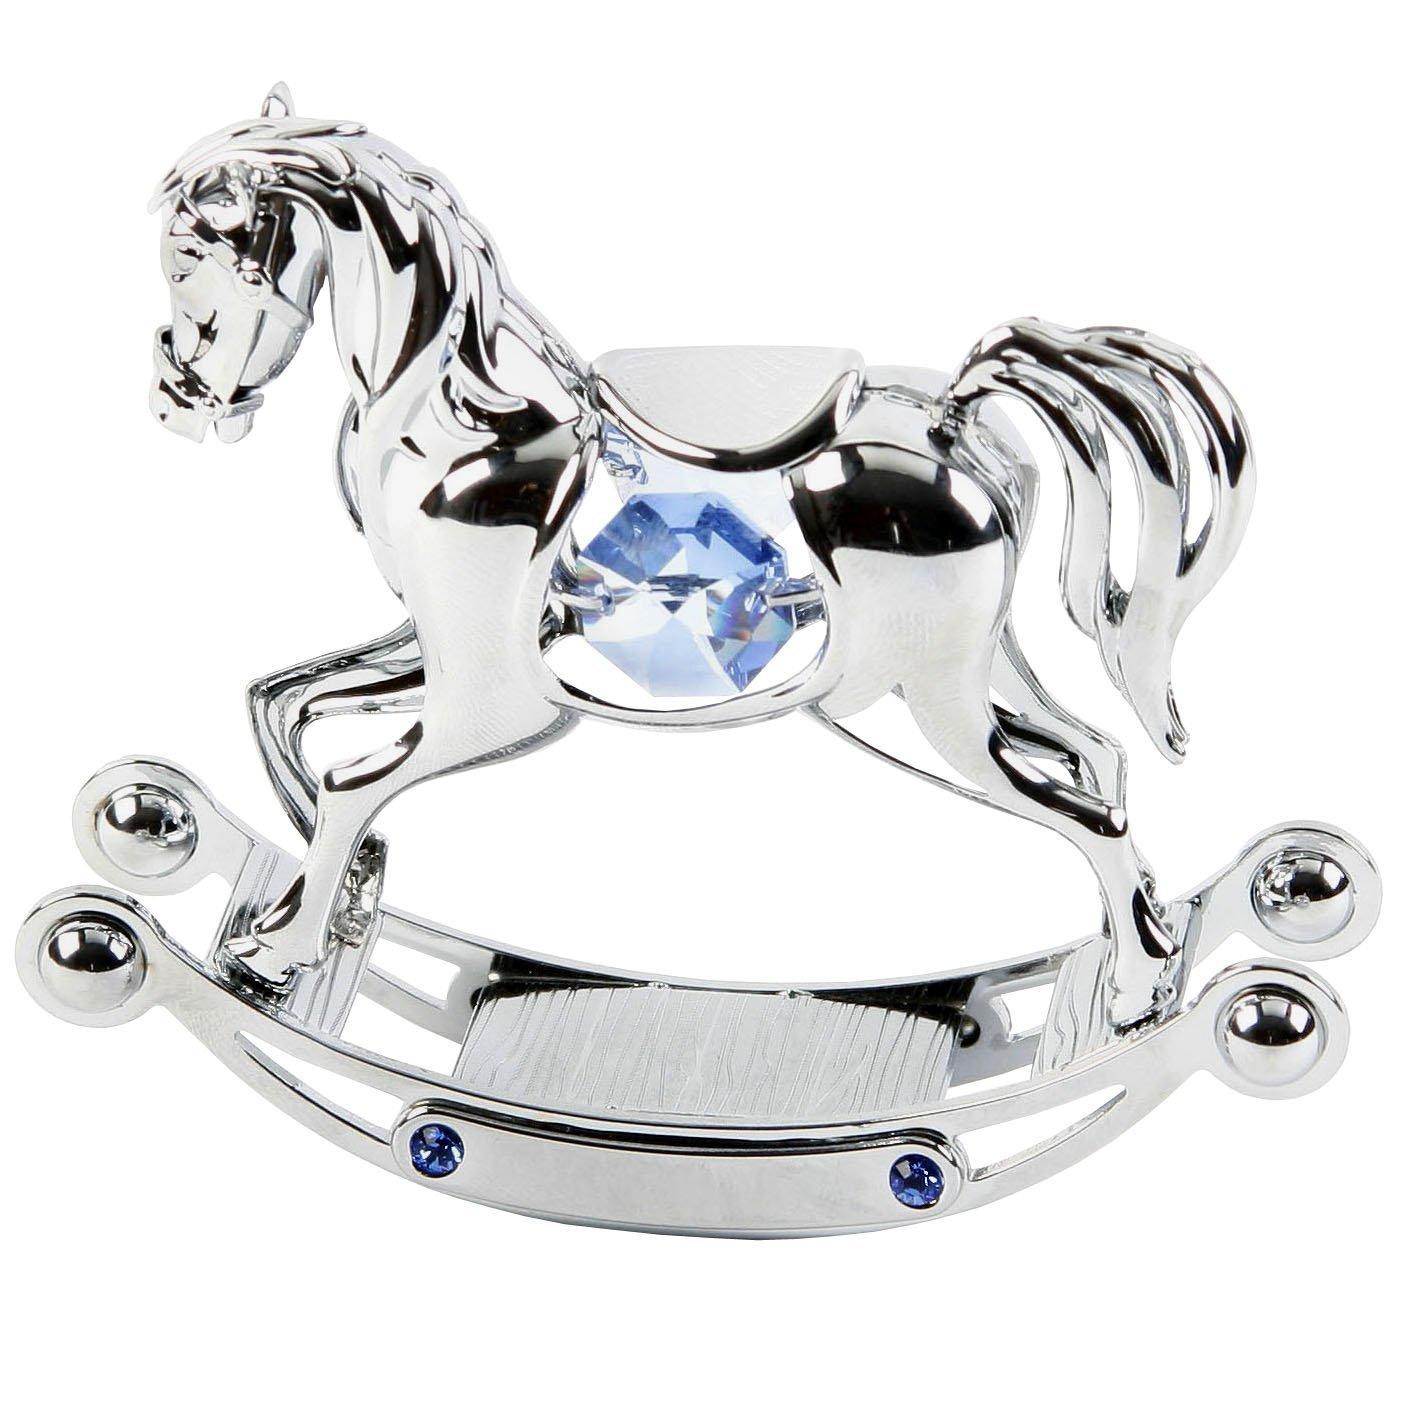 Rocking Horse Crystocraft Blue with Swarovski Crystals